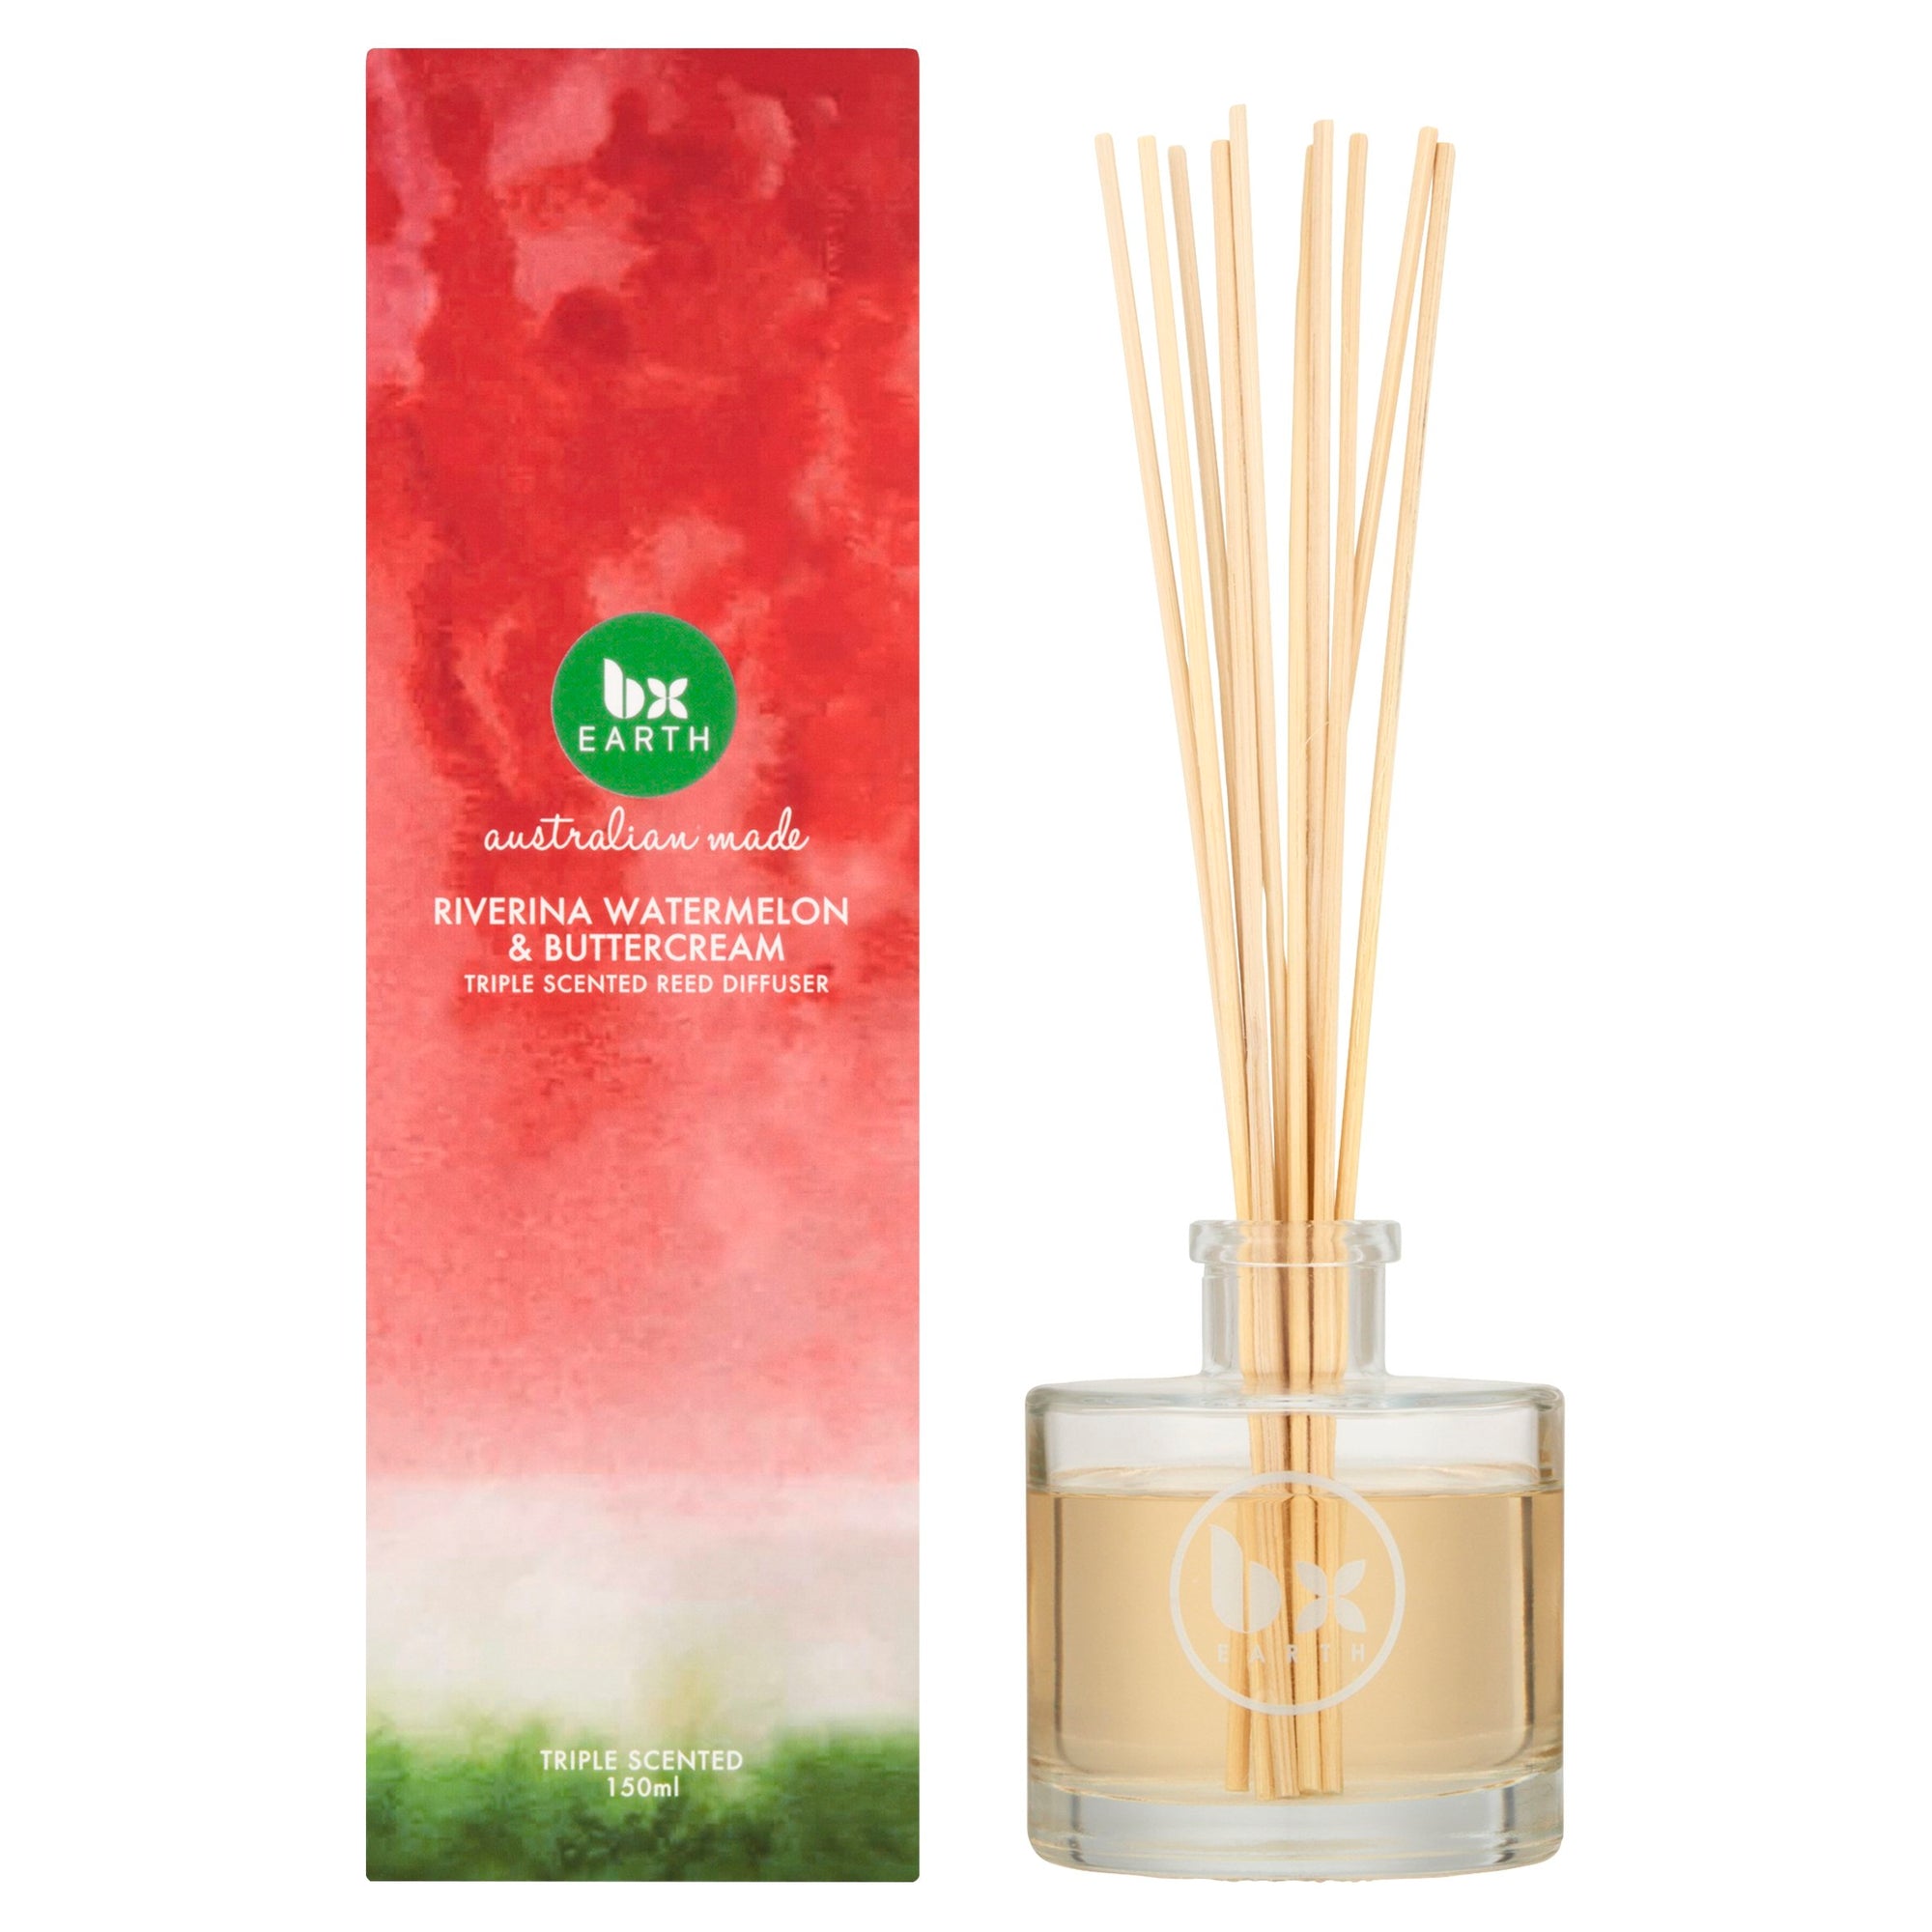 Riverina Watermelon and Buttercream Reed Diffuser